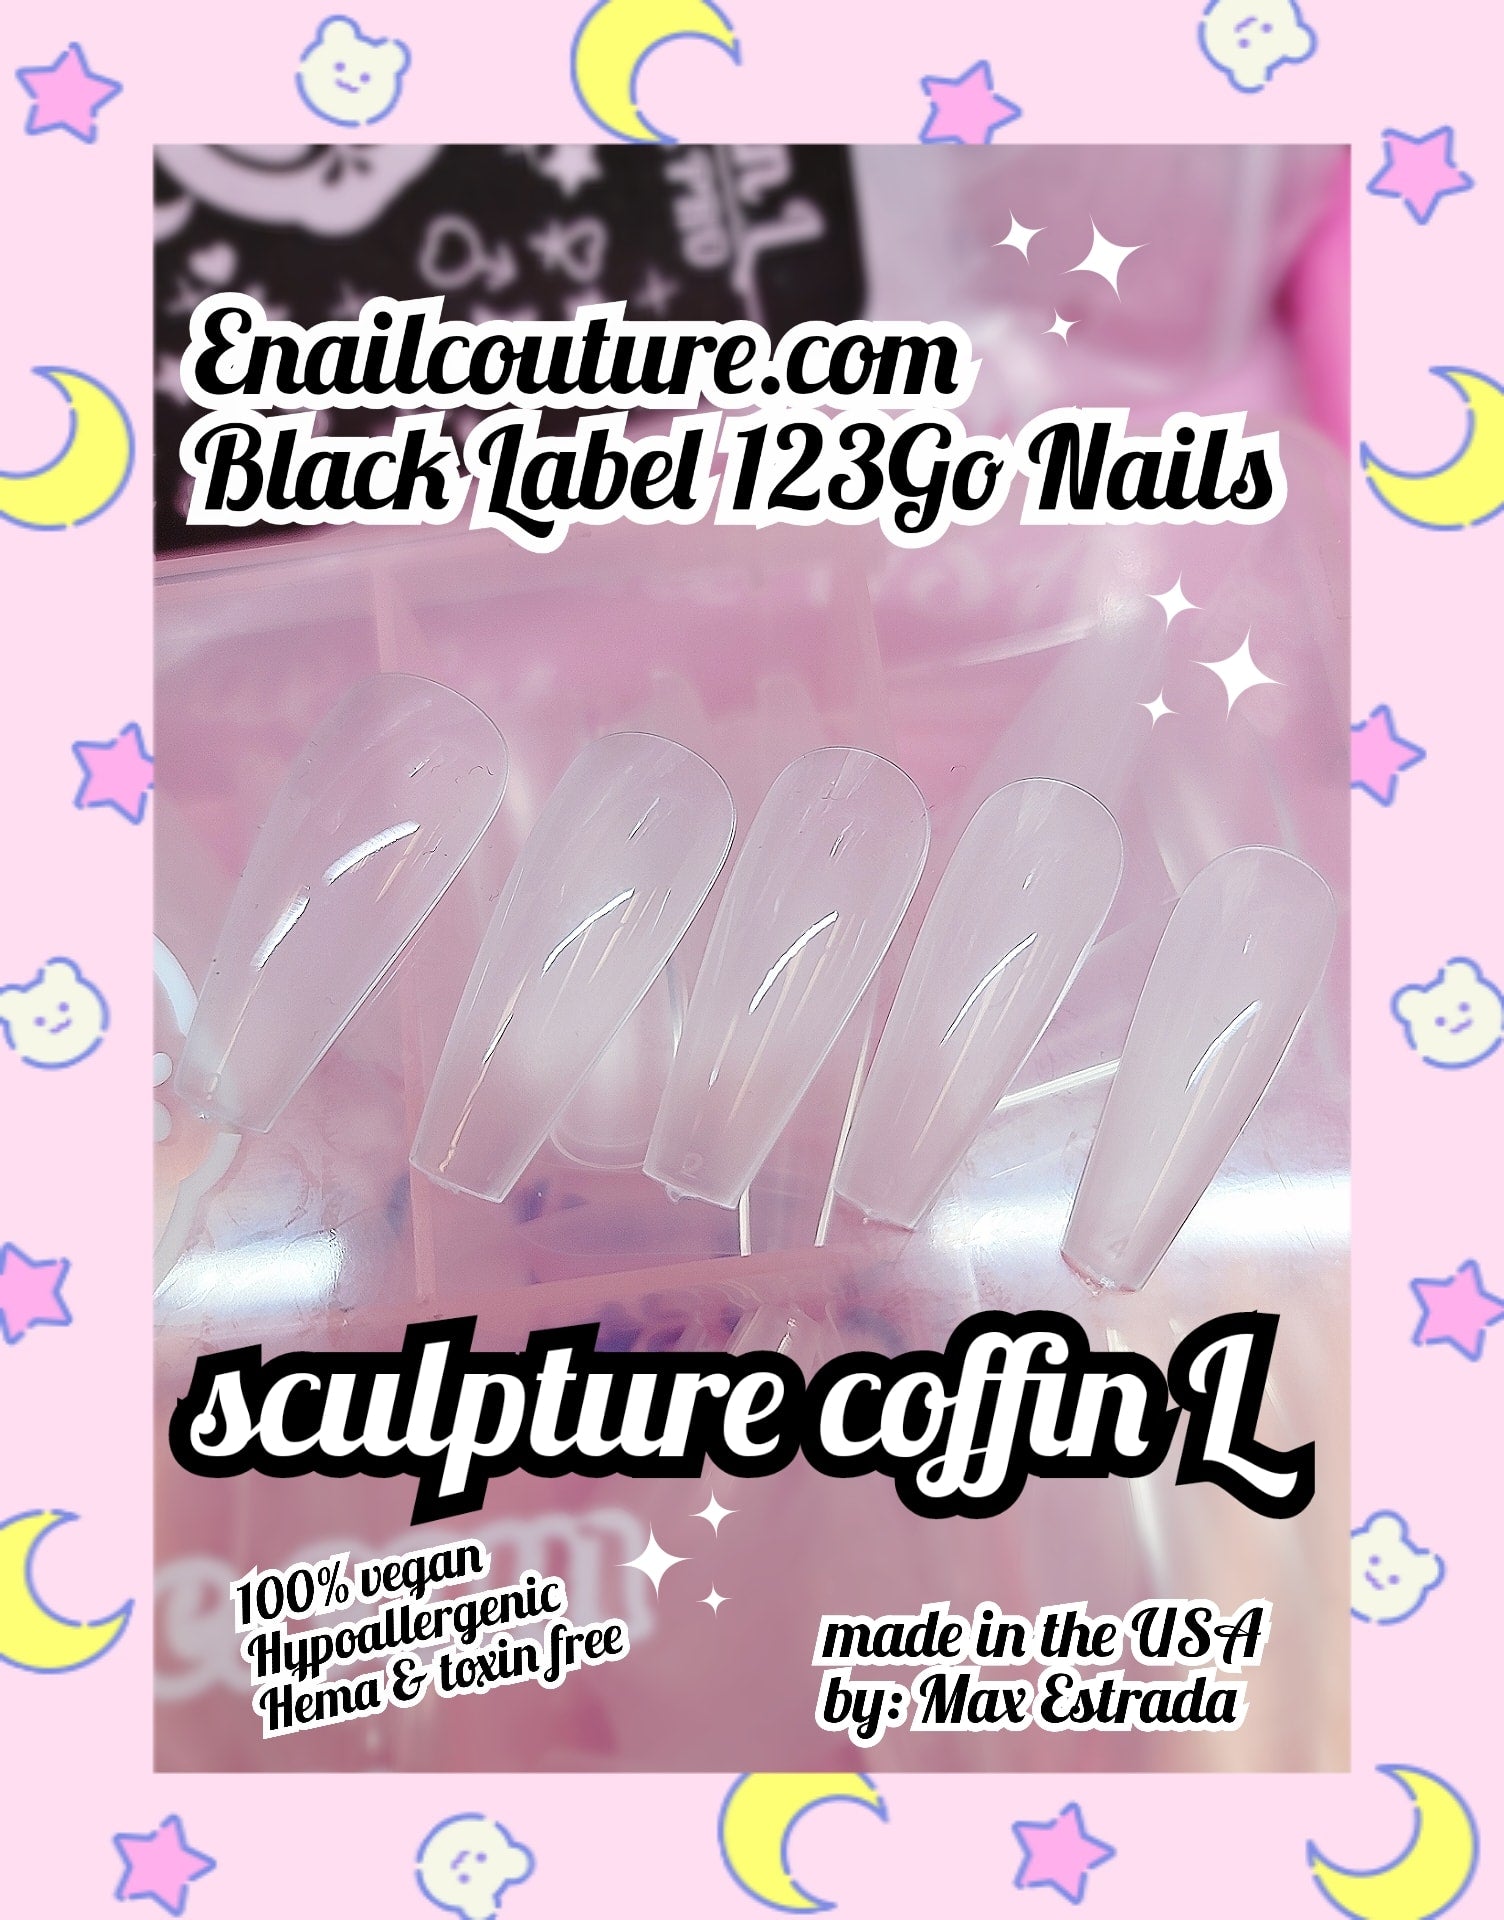 123go Black Label Nails Sculpture Coffin L (Soft Gel Nail Tips- Clear Cover Full Nail Extensions - Pre-shaped Acrylic False Gelly Nail Tips 12 Sizes for DIY Salon Nail Extensions)